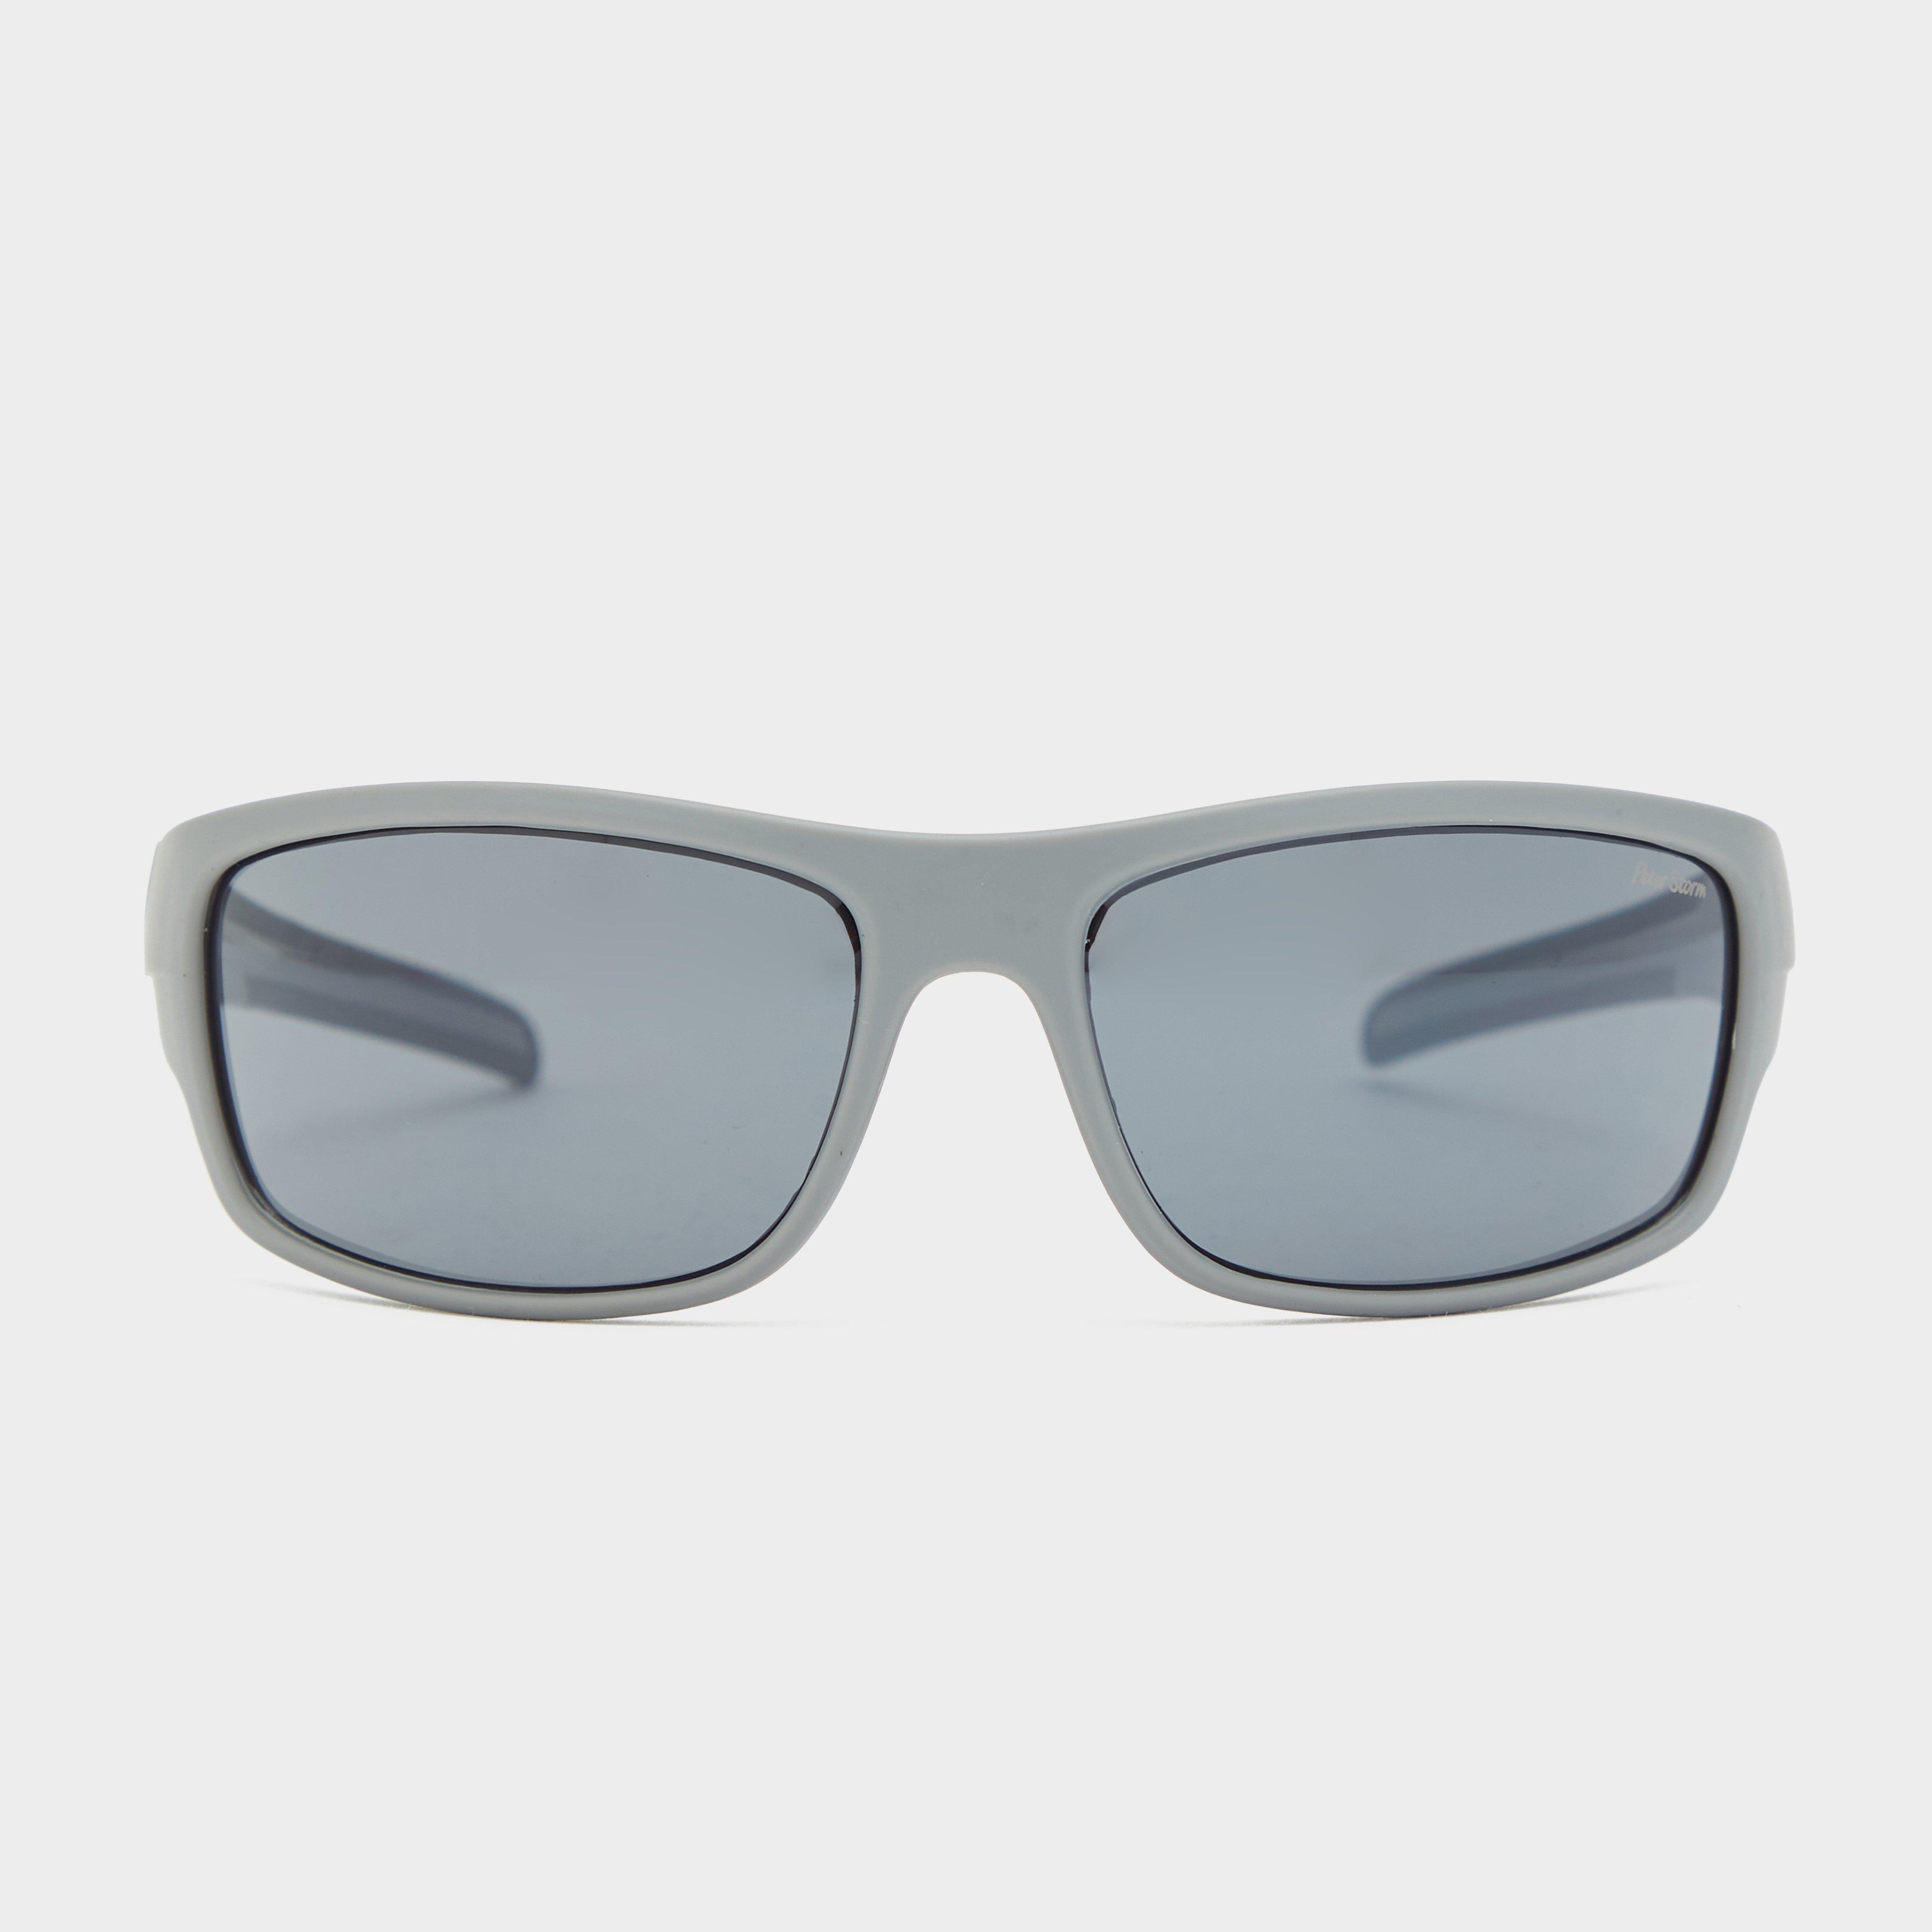 Image of Peter Storm Dartmouth Sunglasses - Dgy, DGY